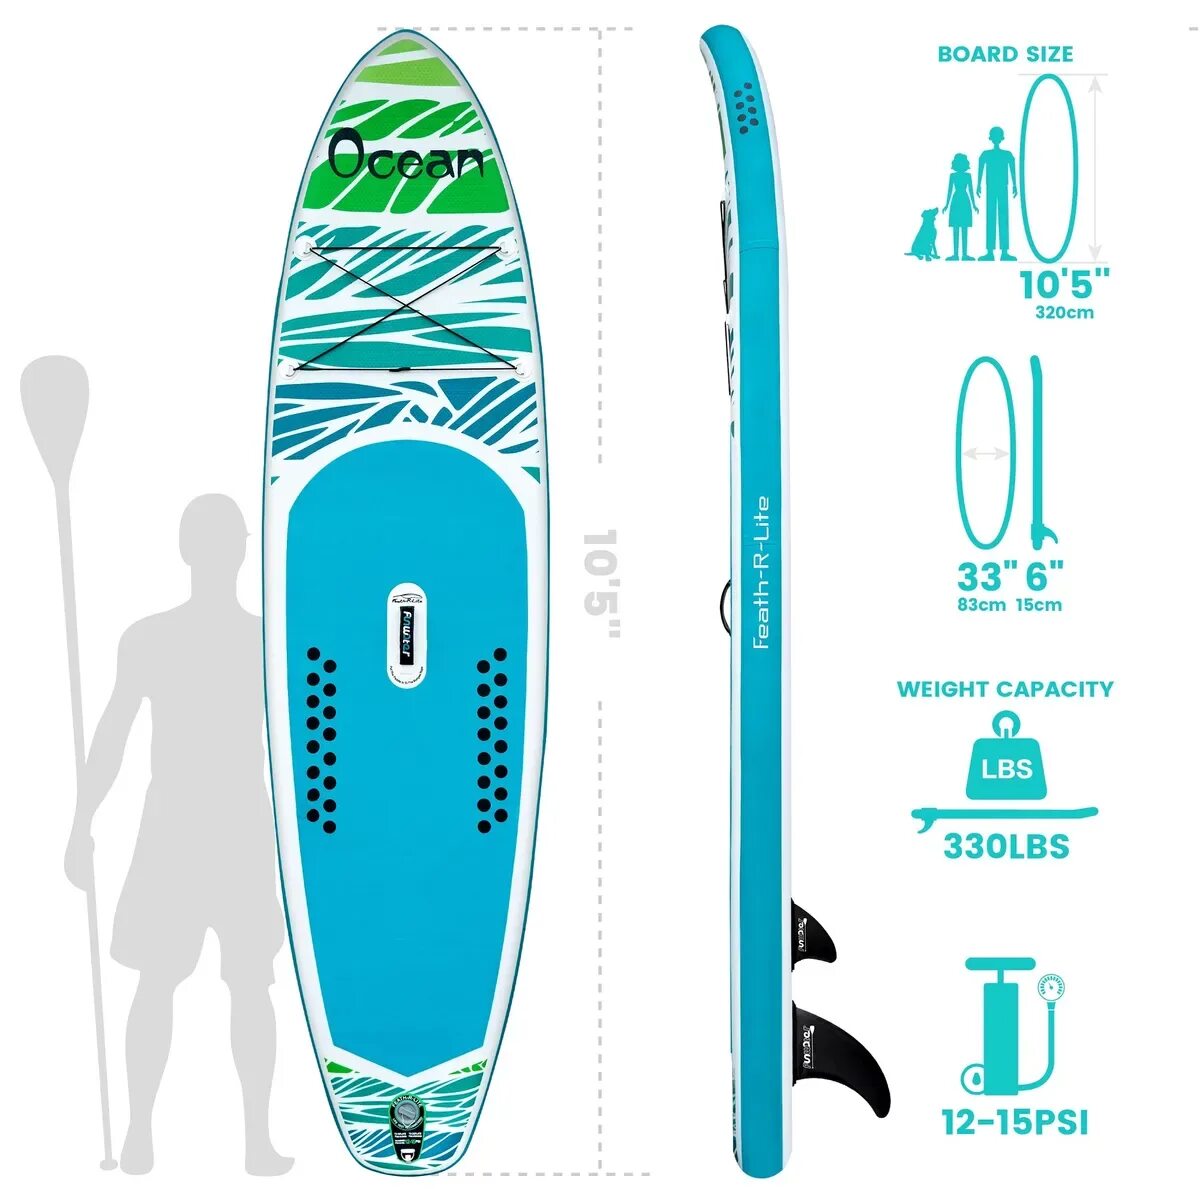 Feath r lite. FUNWATER sup Board. Sup борд FUNWATER Tiki 10'6. FUNWATER Ocean 10.6. Feath-r-Lite sup.